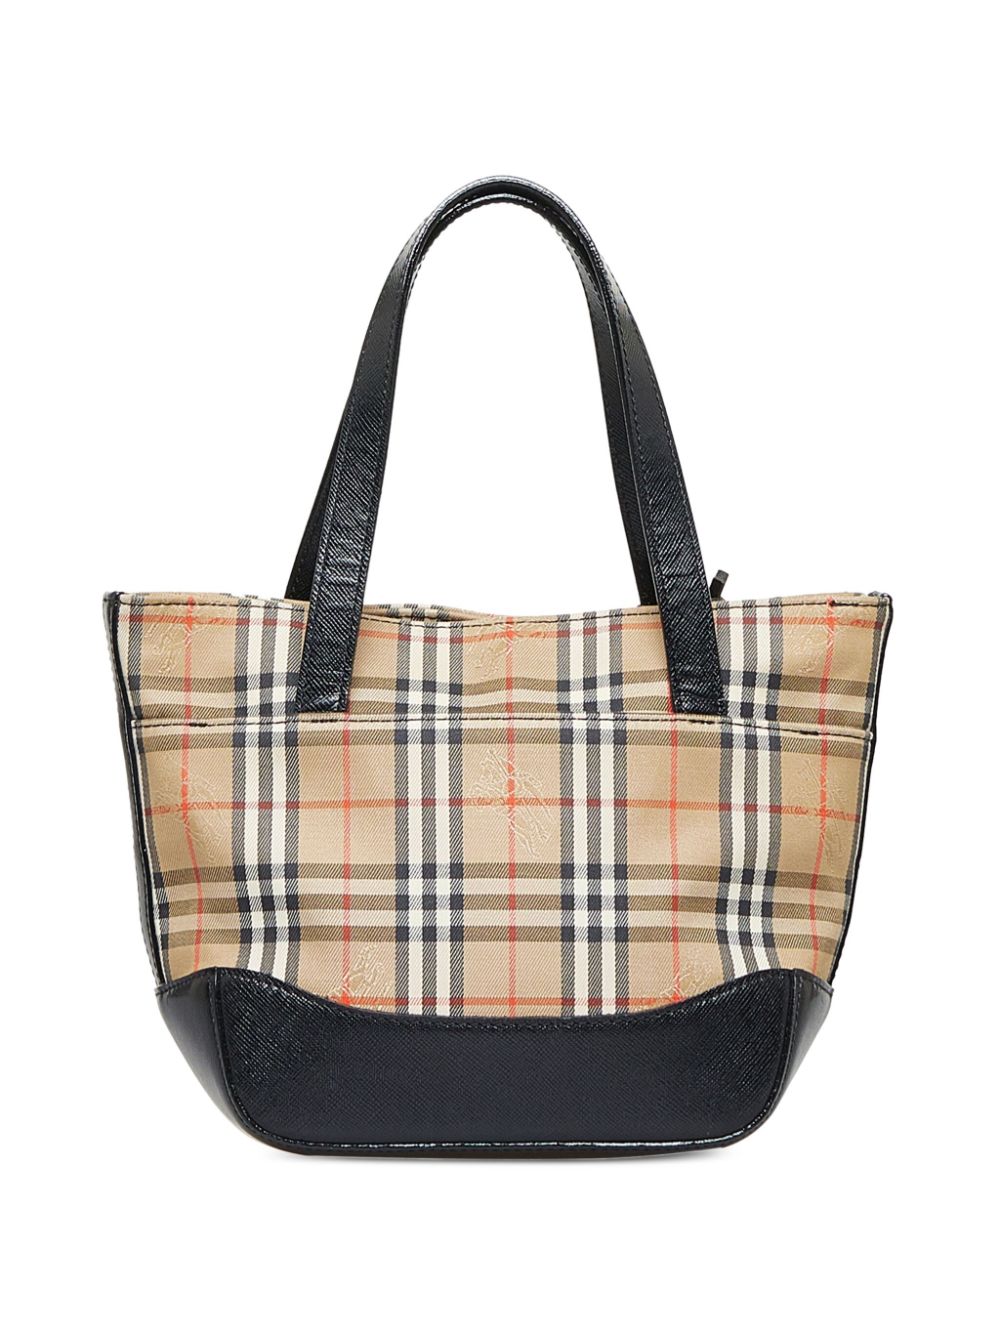 Burberry Pre-Owned Haymarket Check tote bag - Bruin